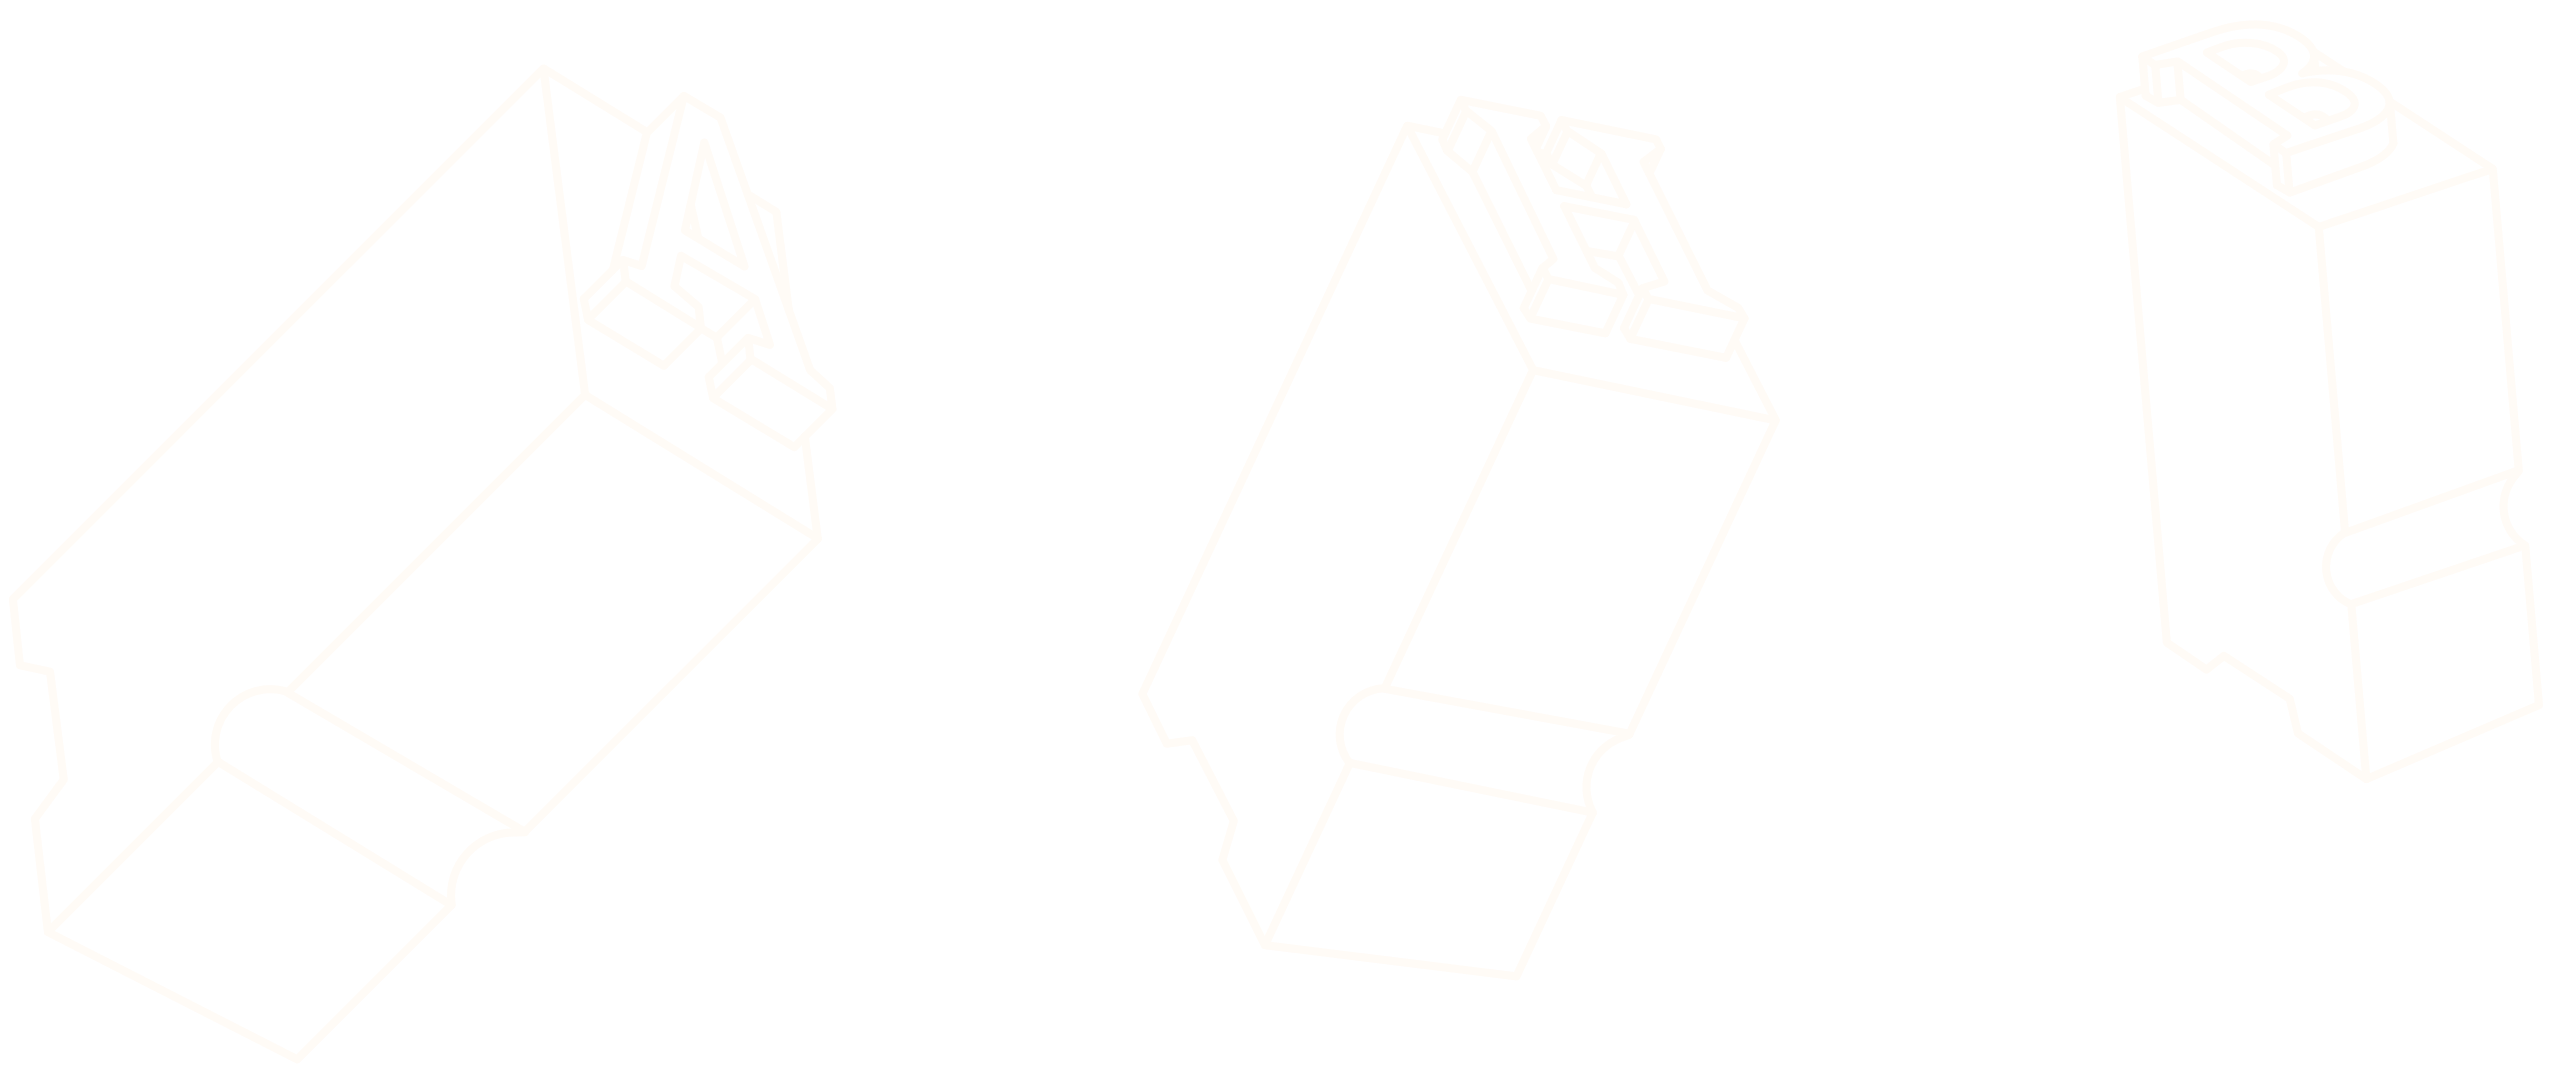 Line drawings of metal moveable type characters A, B, and H